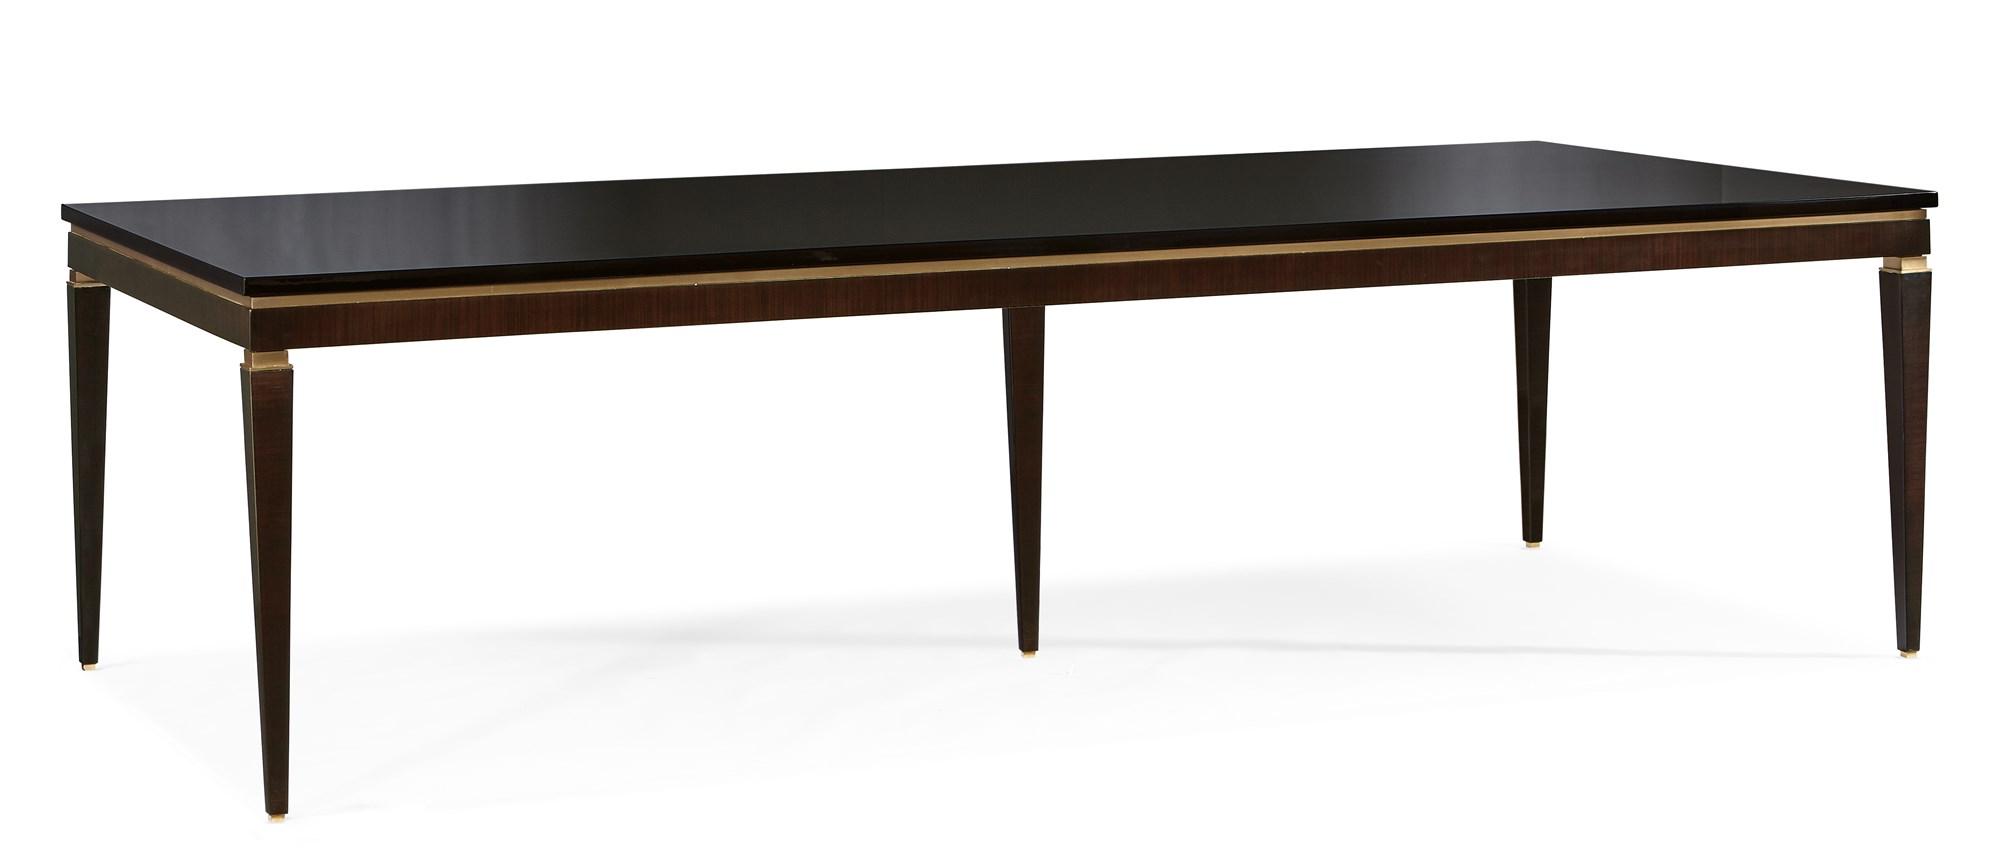 Contemporary Dining Table THE LIFESTYLE DINING TABLE SIG-418-201 in Ebony 